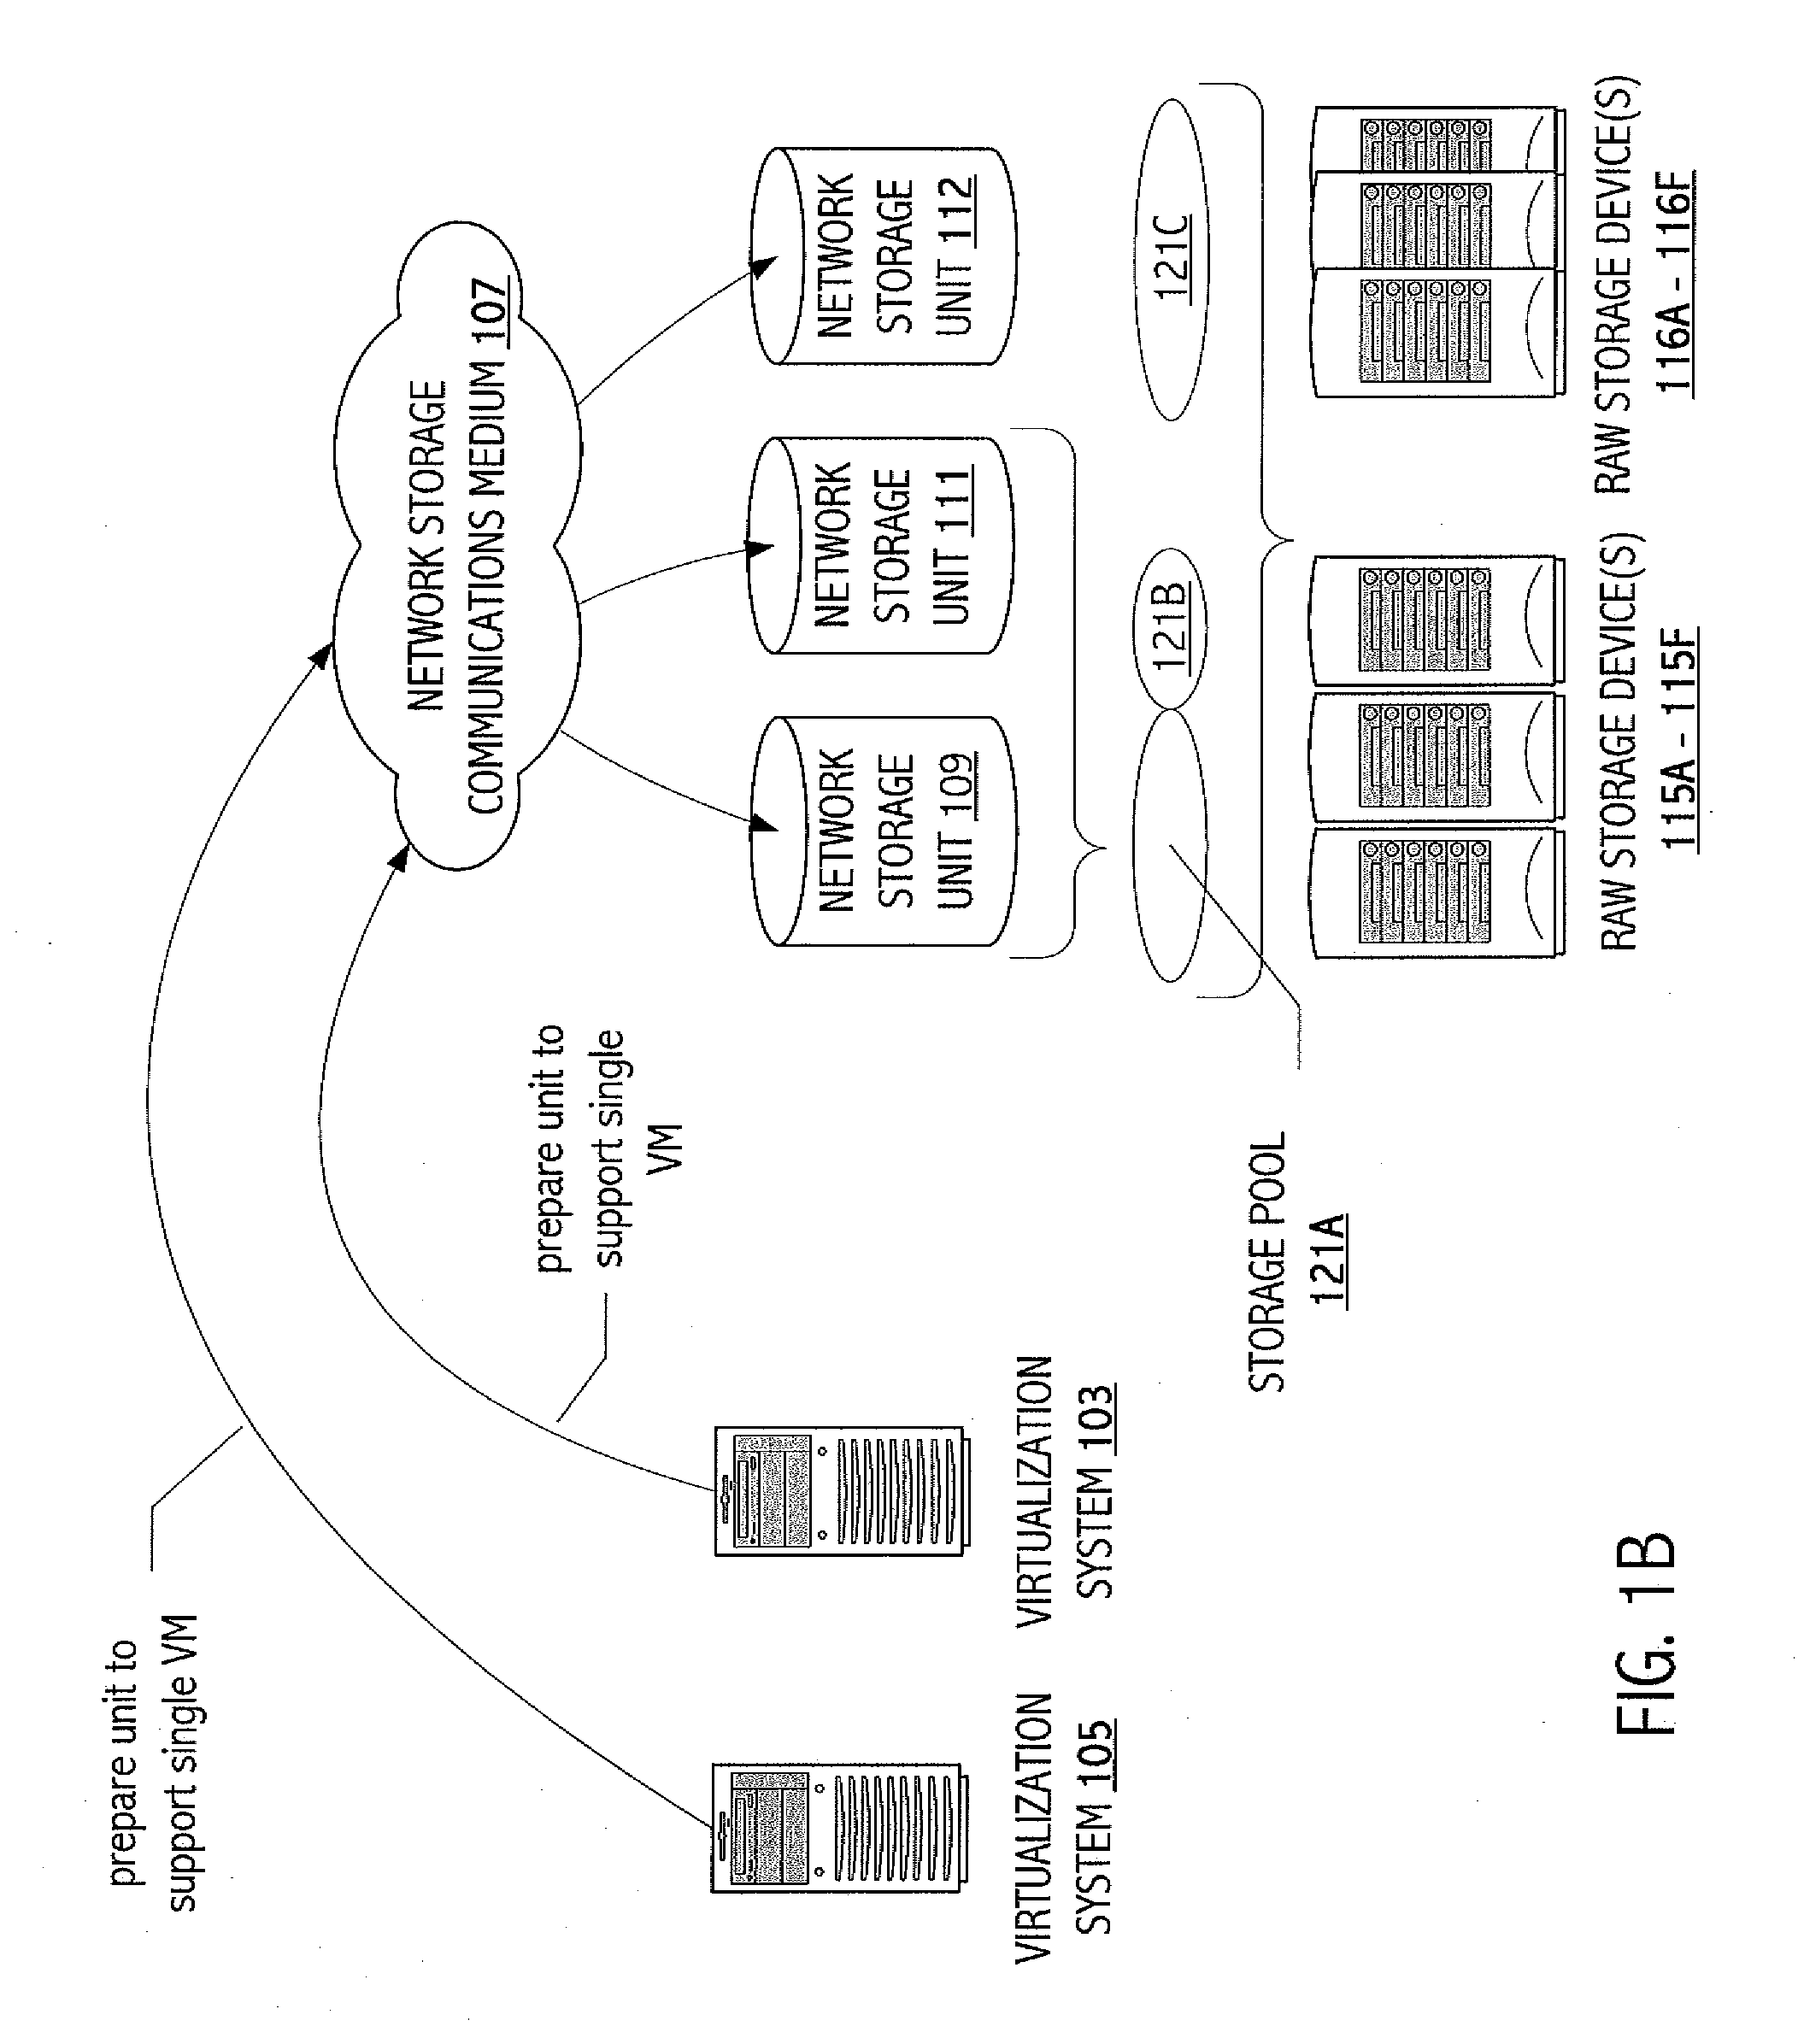 Implementation of Virtual Machine Operations Using Storage System Functionality